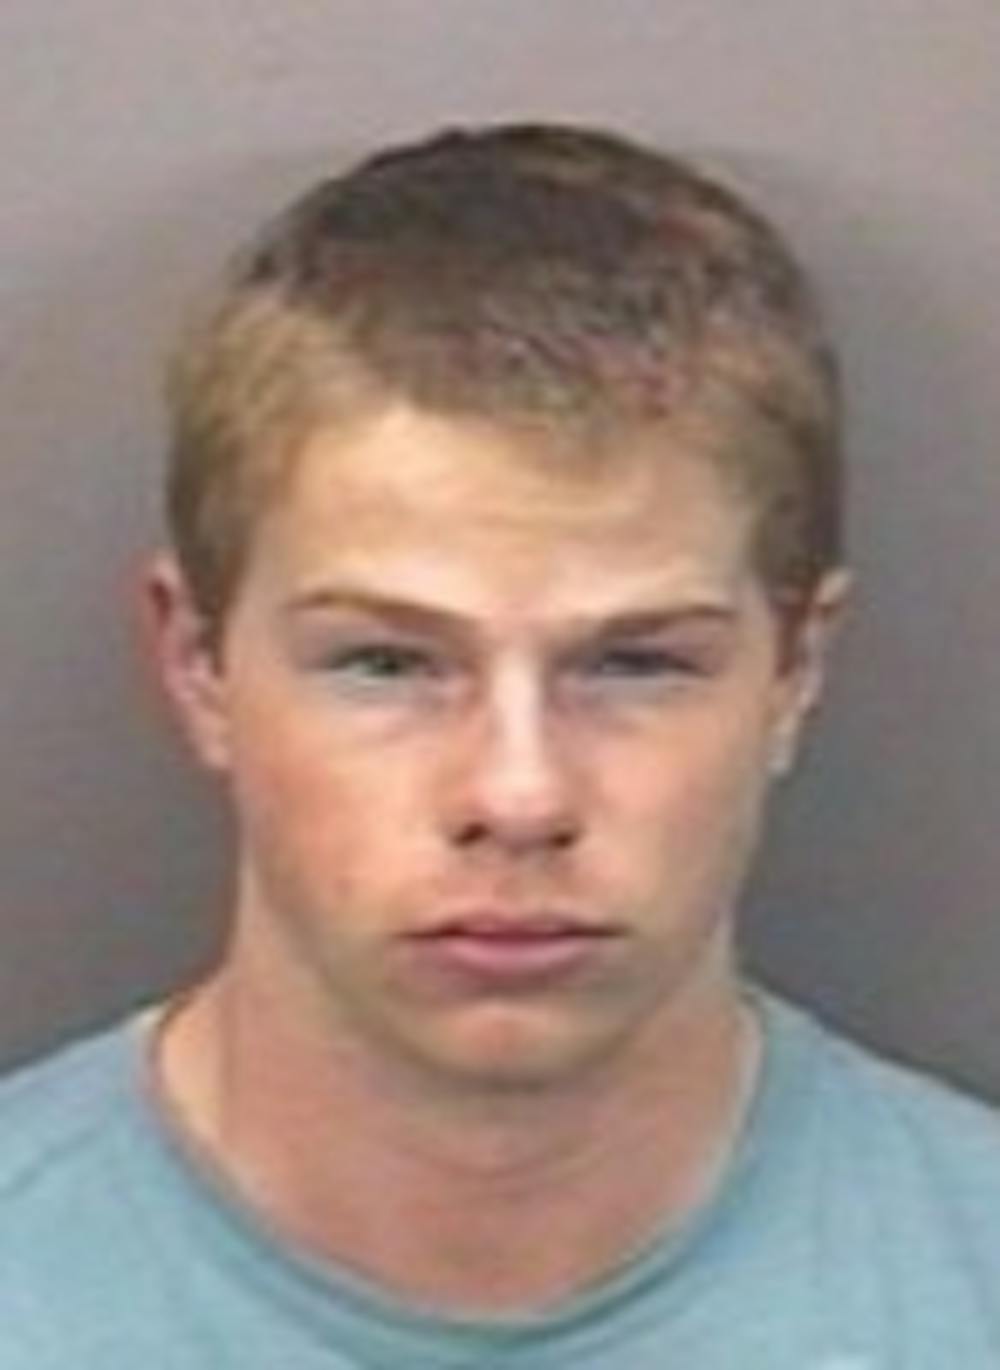 Photo: UNC student cleared of methamphetamine trafficking charges